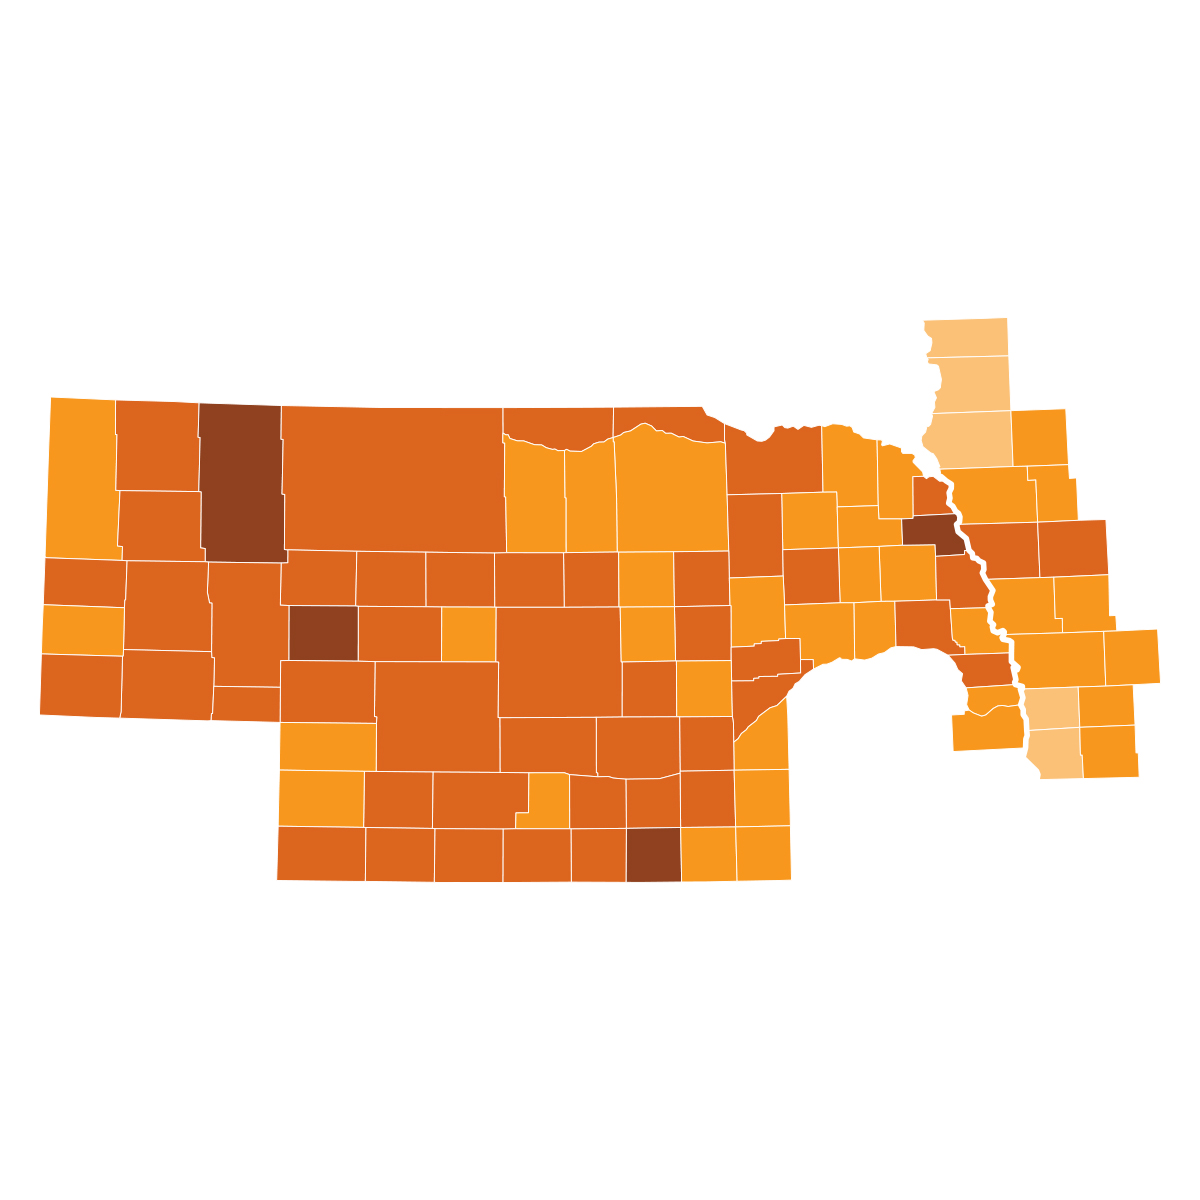 Food insecurity rate heat map of Nebraska and Iowa counties served by Food Bank for the Heartland